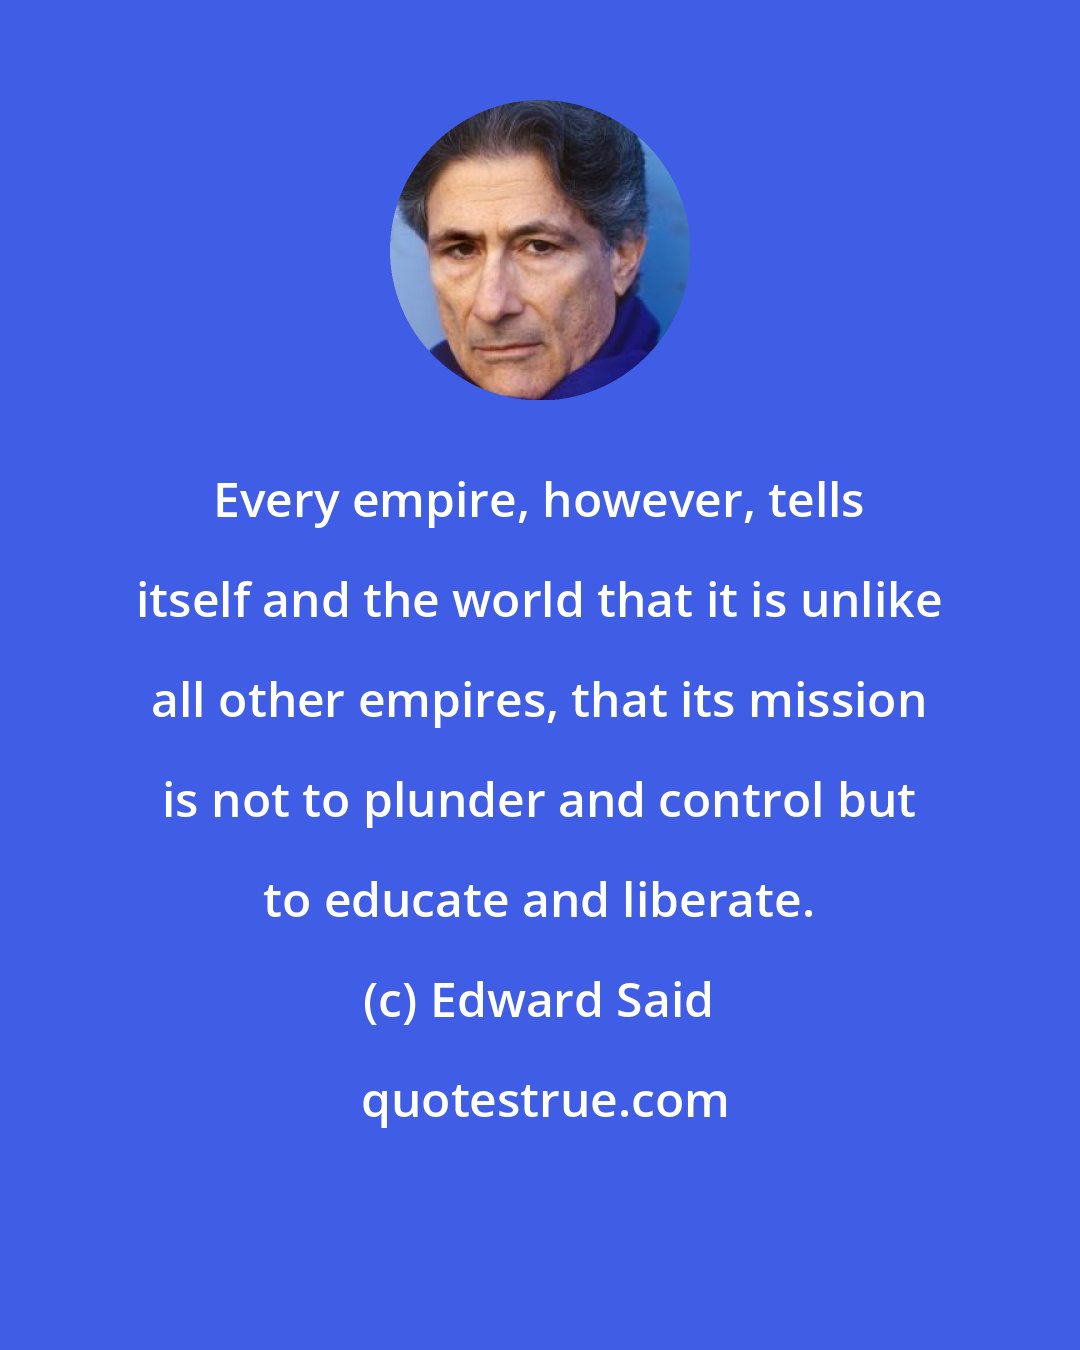 Edward Said: Every empire, however, tells itself and the world that it is unlike all other empires, that its mission is not to plunder and control but to educate and liberate.